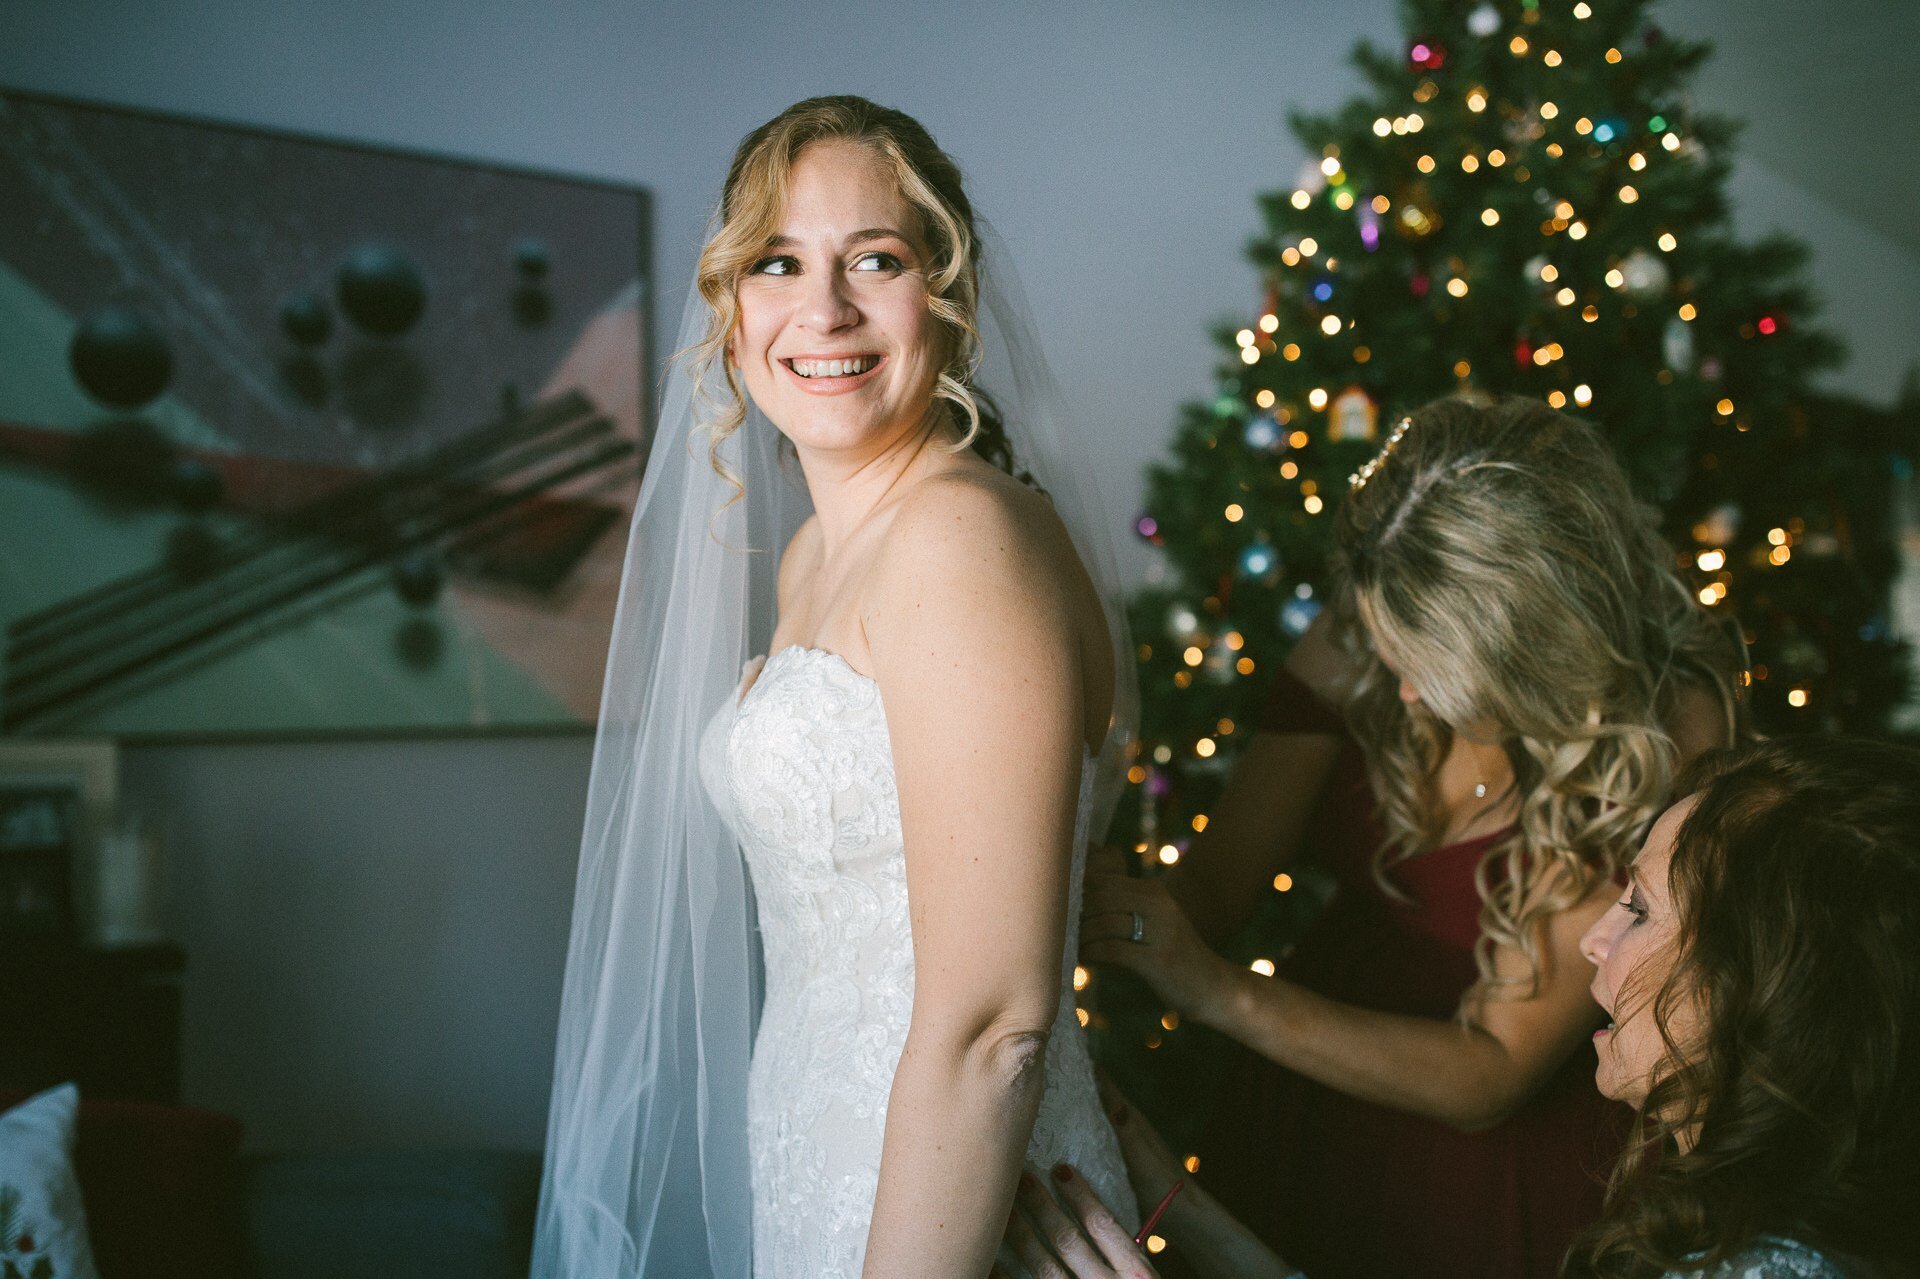 Cleveland Winter Wedding at Windows on the River 1 7.jpg